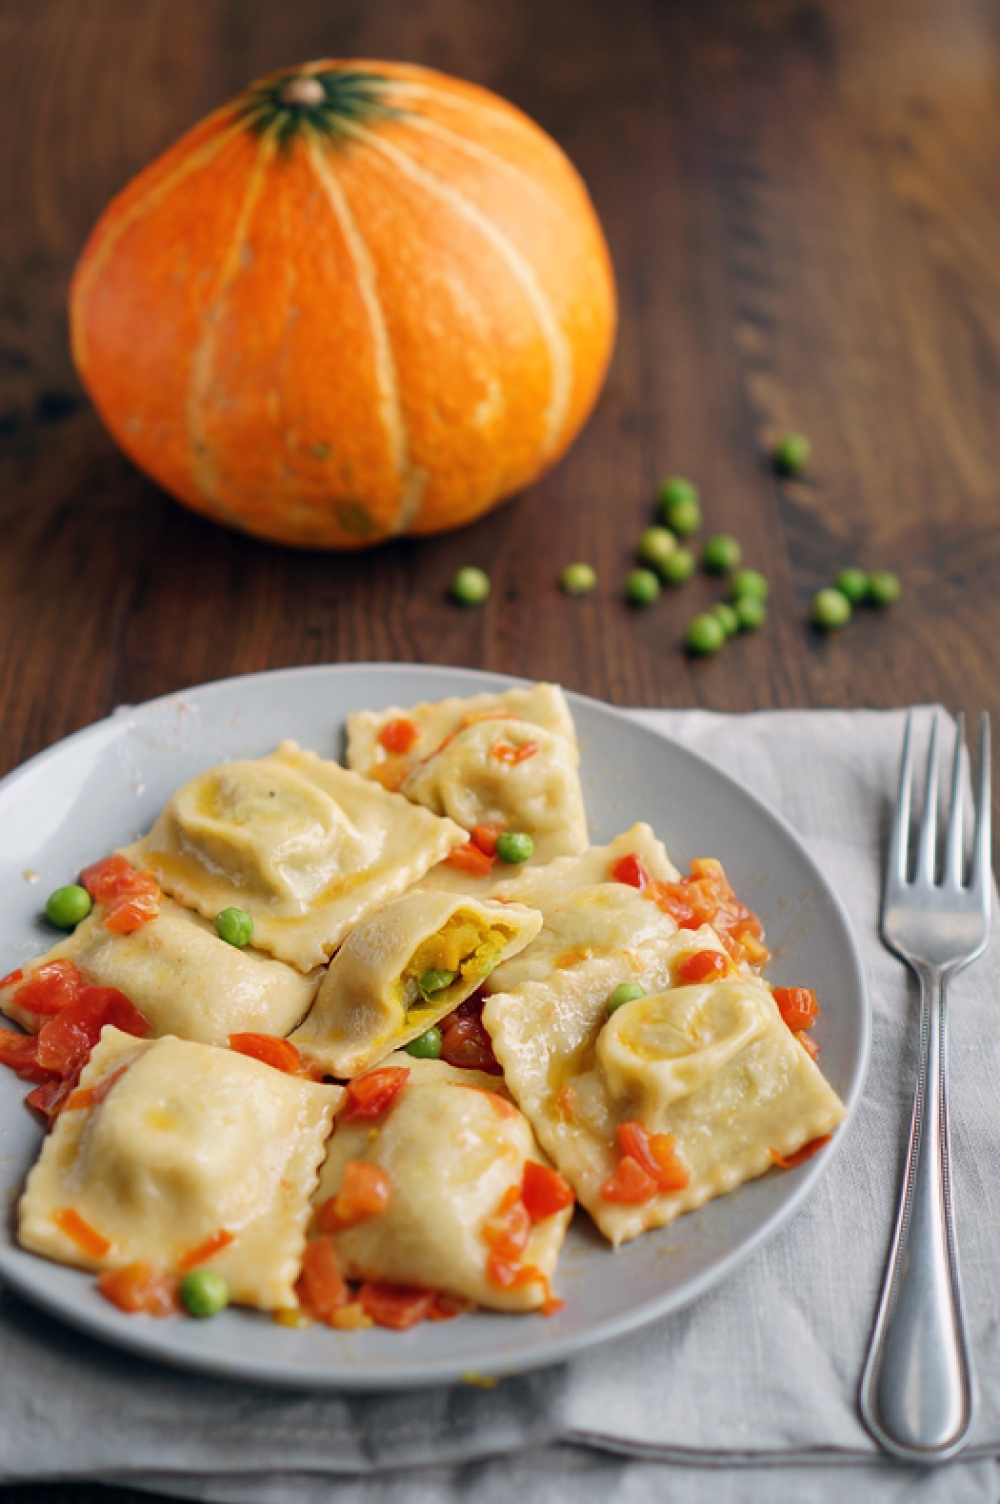 Ravioli with Pumpkin and Peas in Tomato Sauce